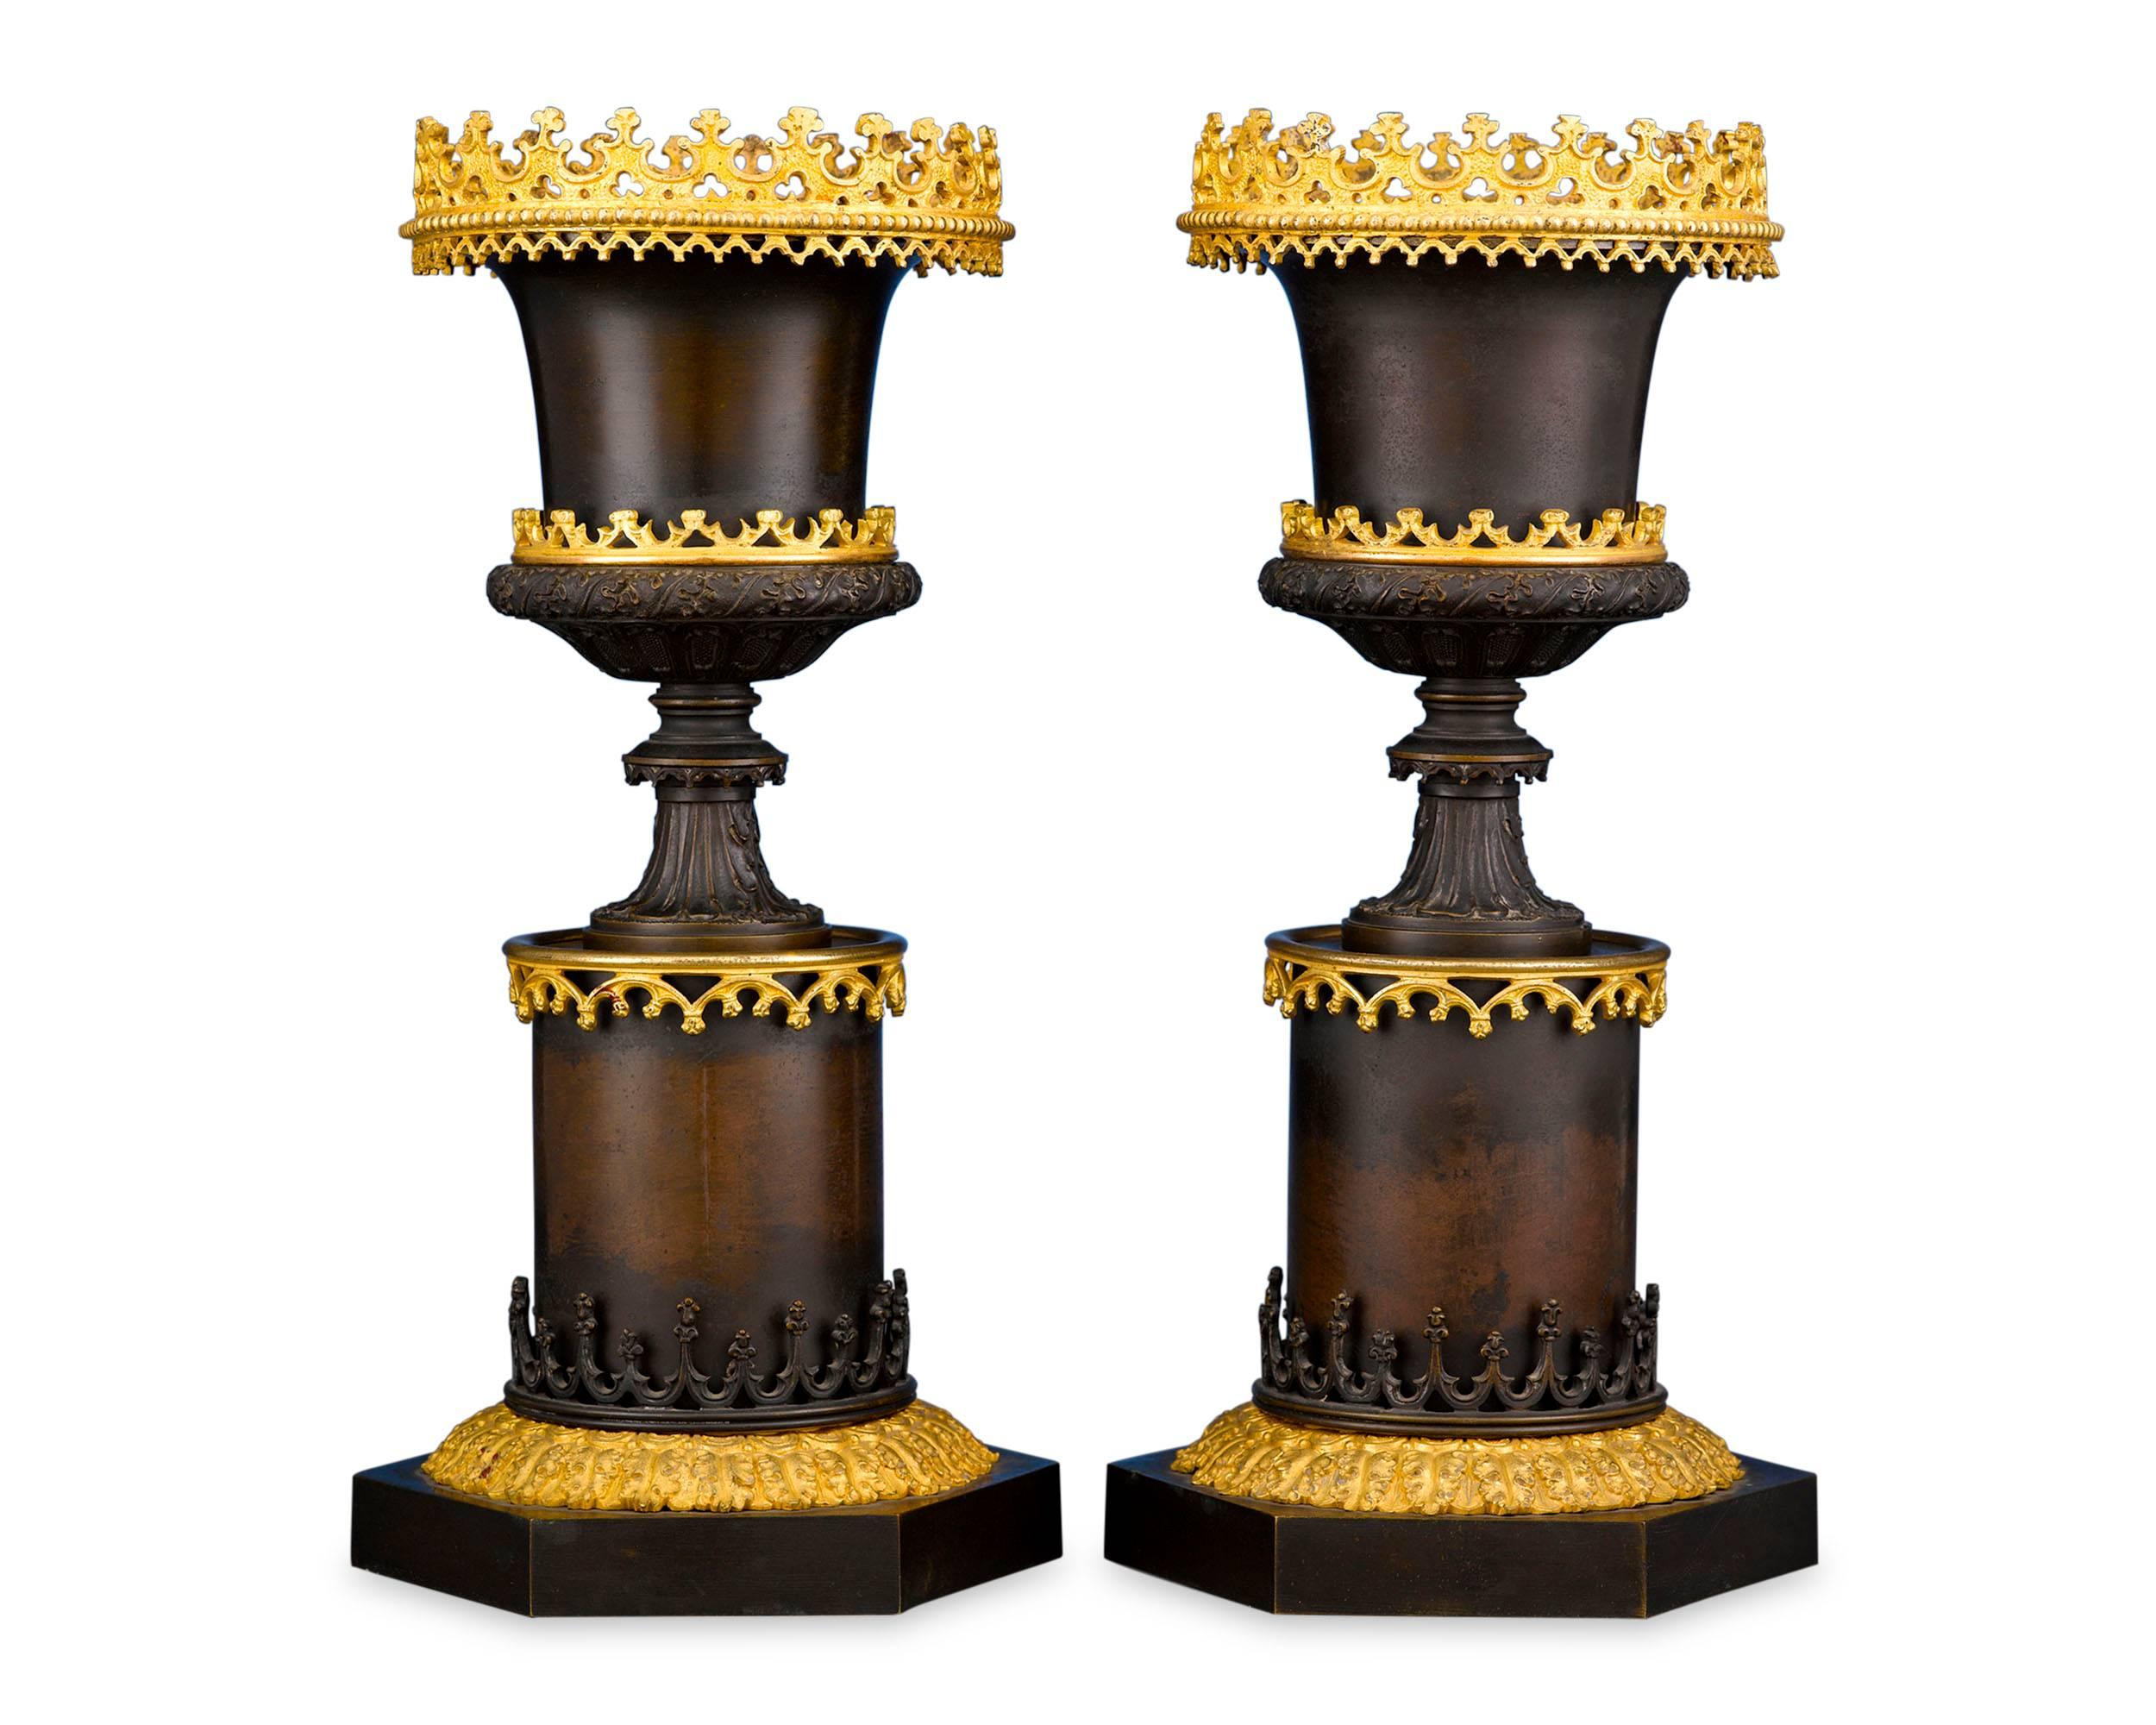 A striking pair of bronze urns, created in the dramatic Gothic style. Resembling classical Greco-Roman vases set upon pedestals, the urns are crafted in a two-toned design, with deep burnished bronze bodies and three galleries of ornate bronze